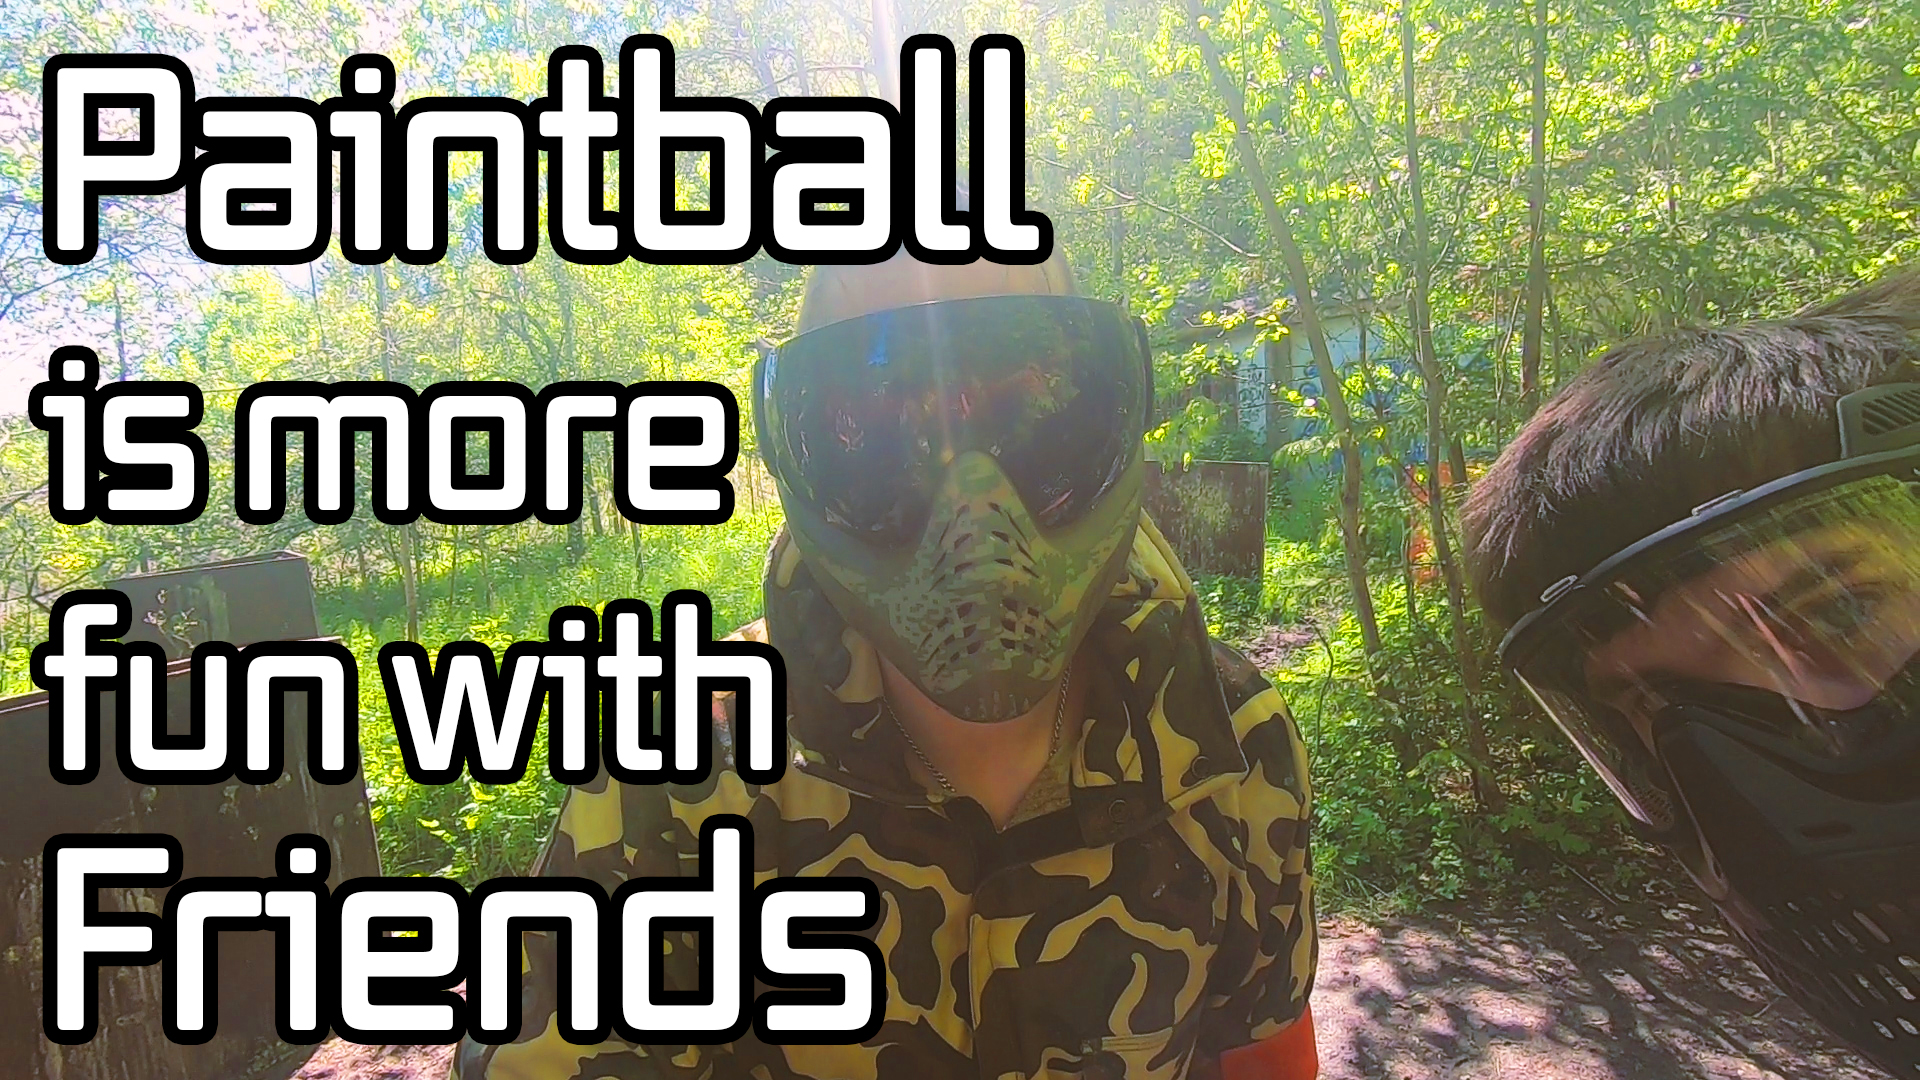 Playing Paintball is more fun with Friends